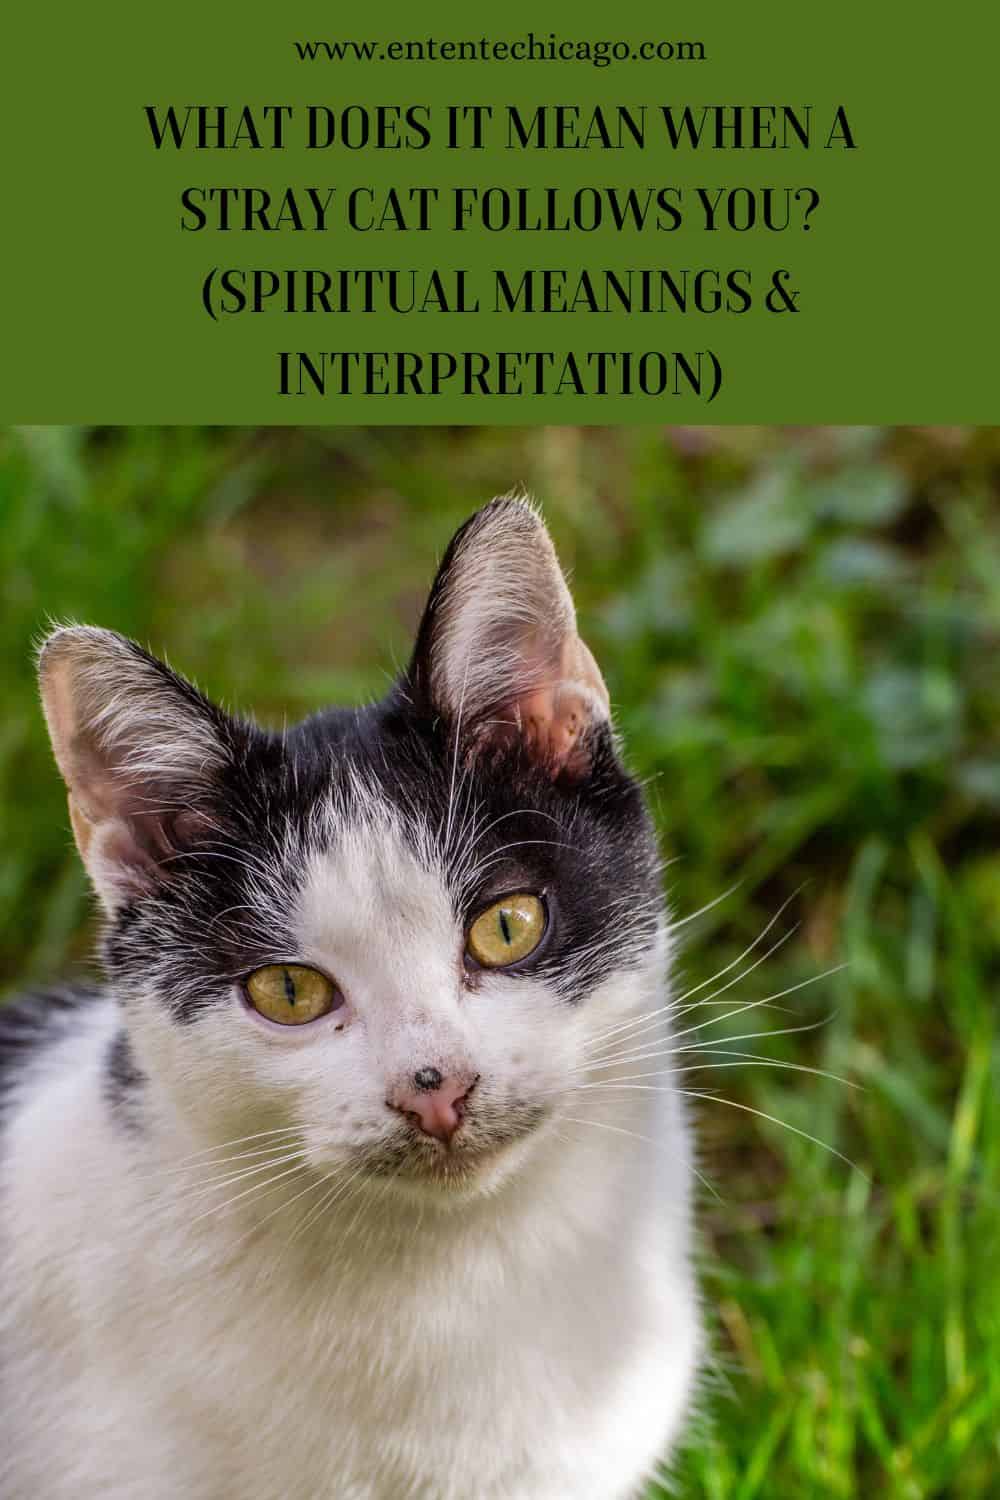 What Does It Mean When A Stray Cat Follows You? (Spiritual Meanings & Interpretation)